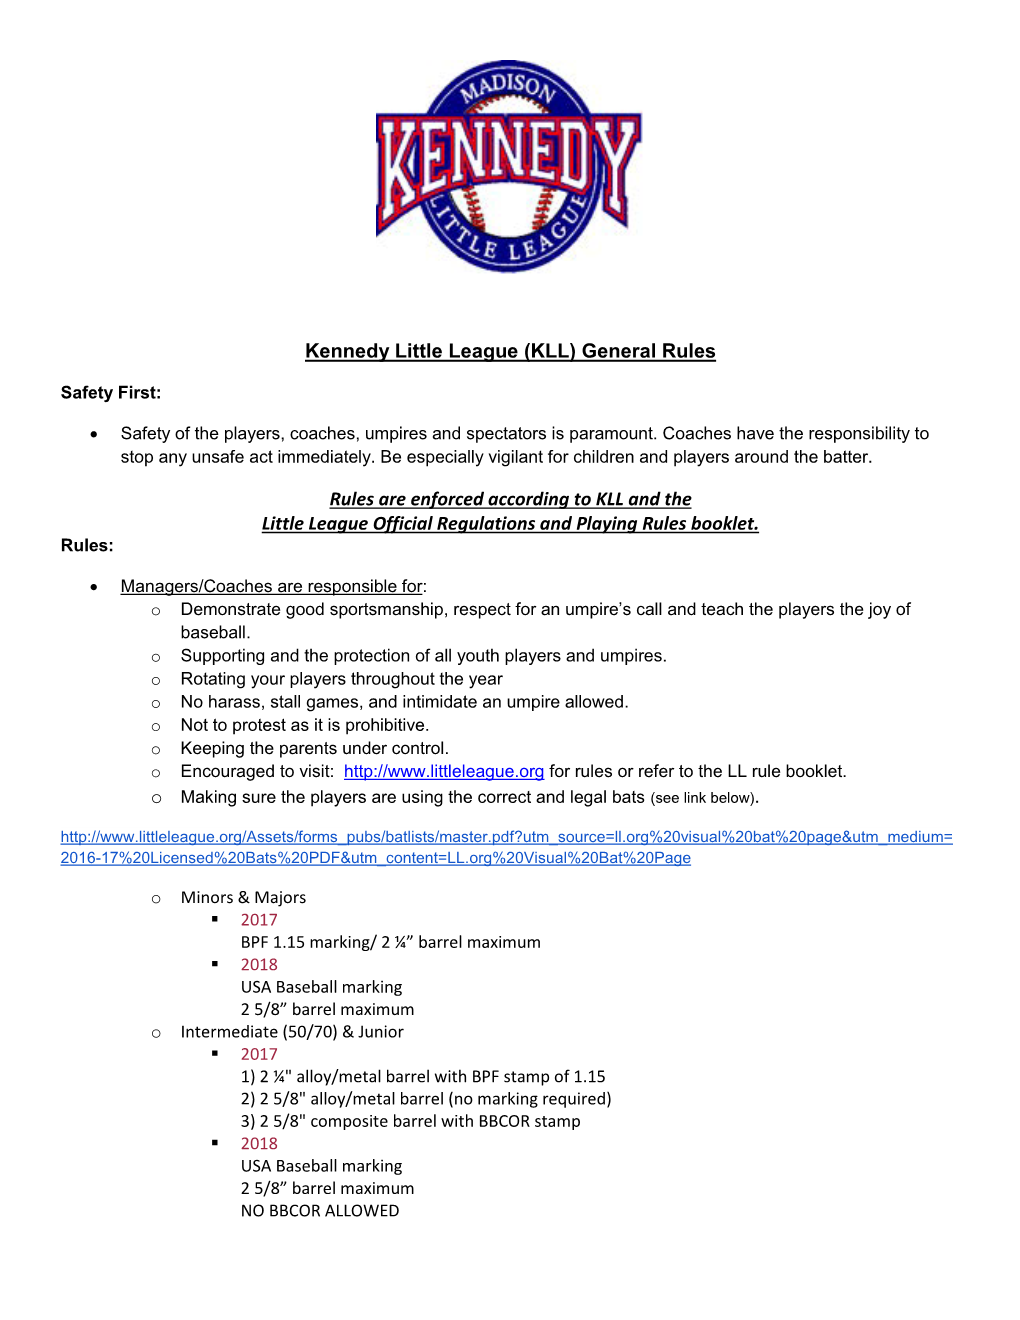 Kennedy Little League (KLL) General Rules Rules Are Enforced According to KLL and the Little League Official Regulations And